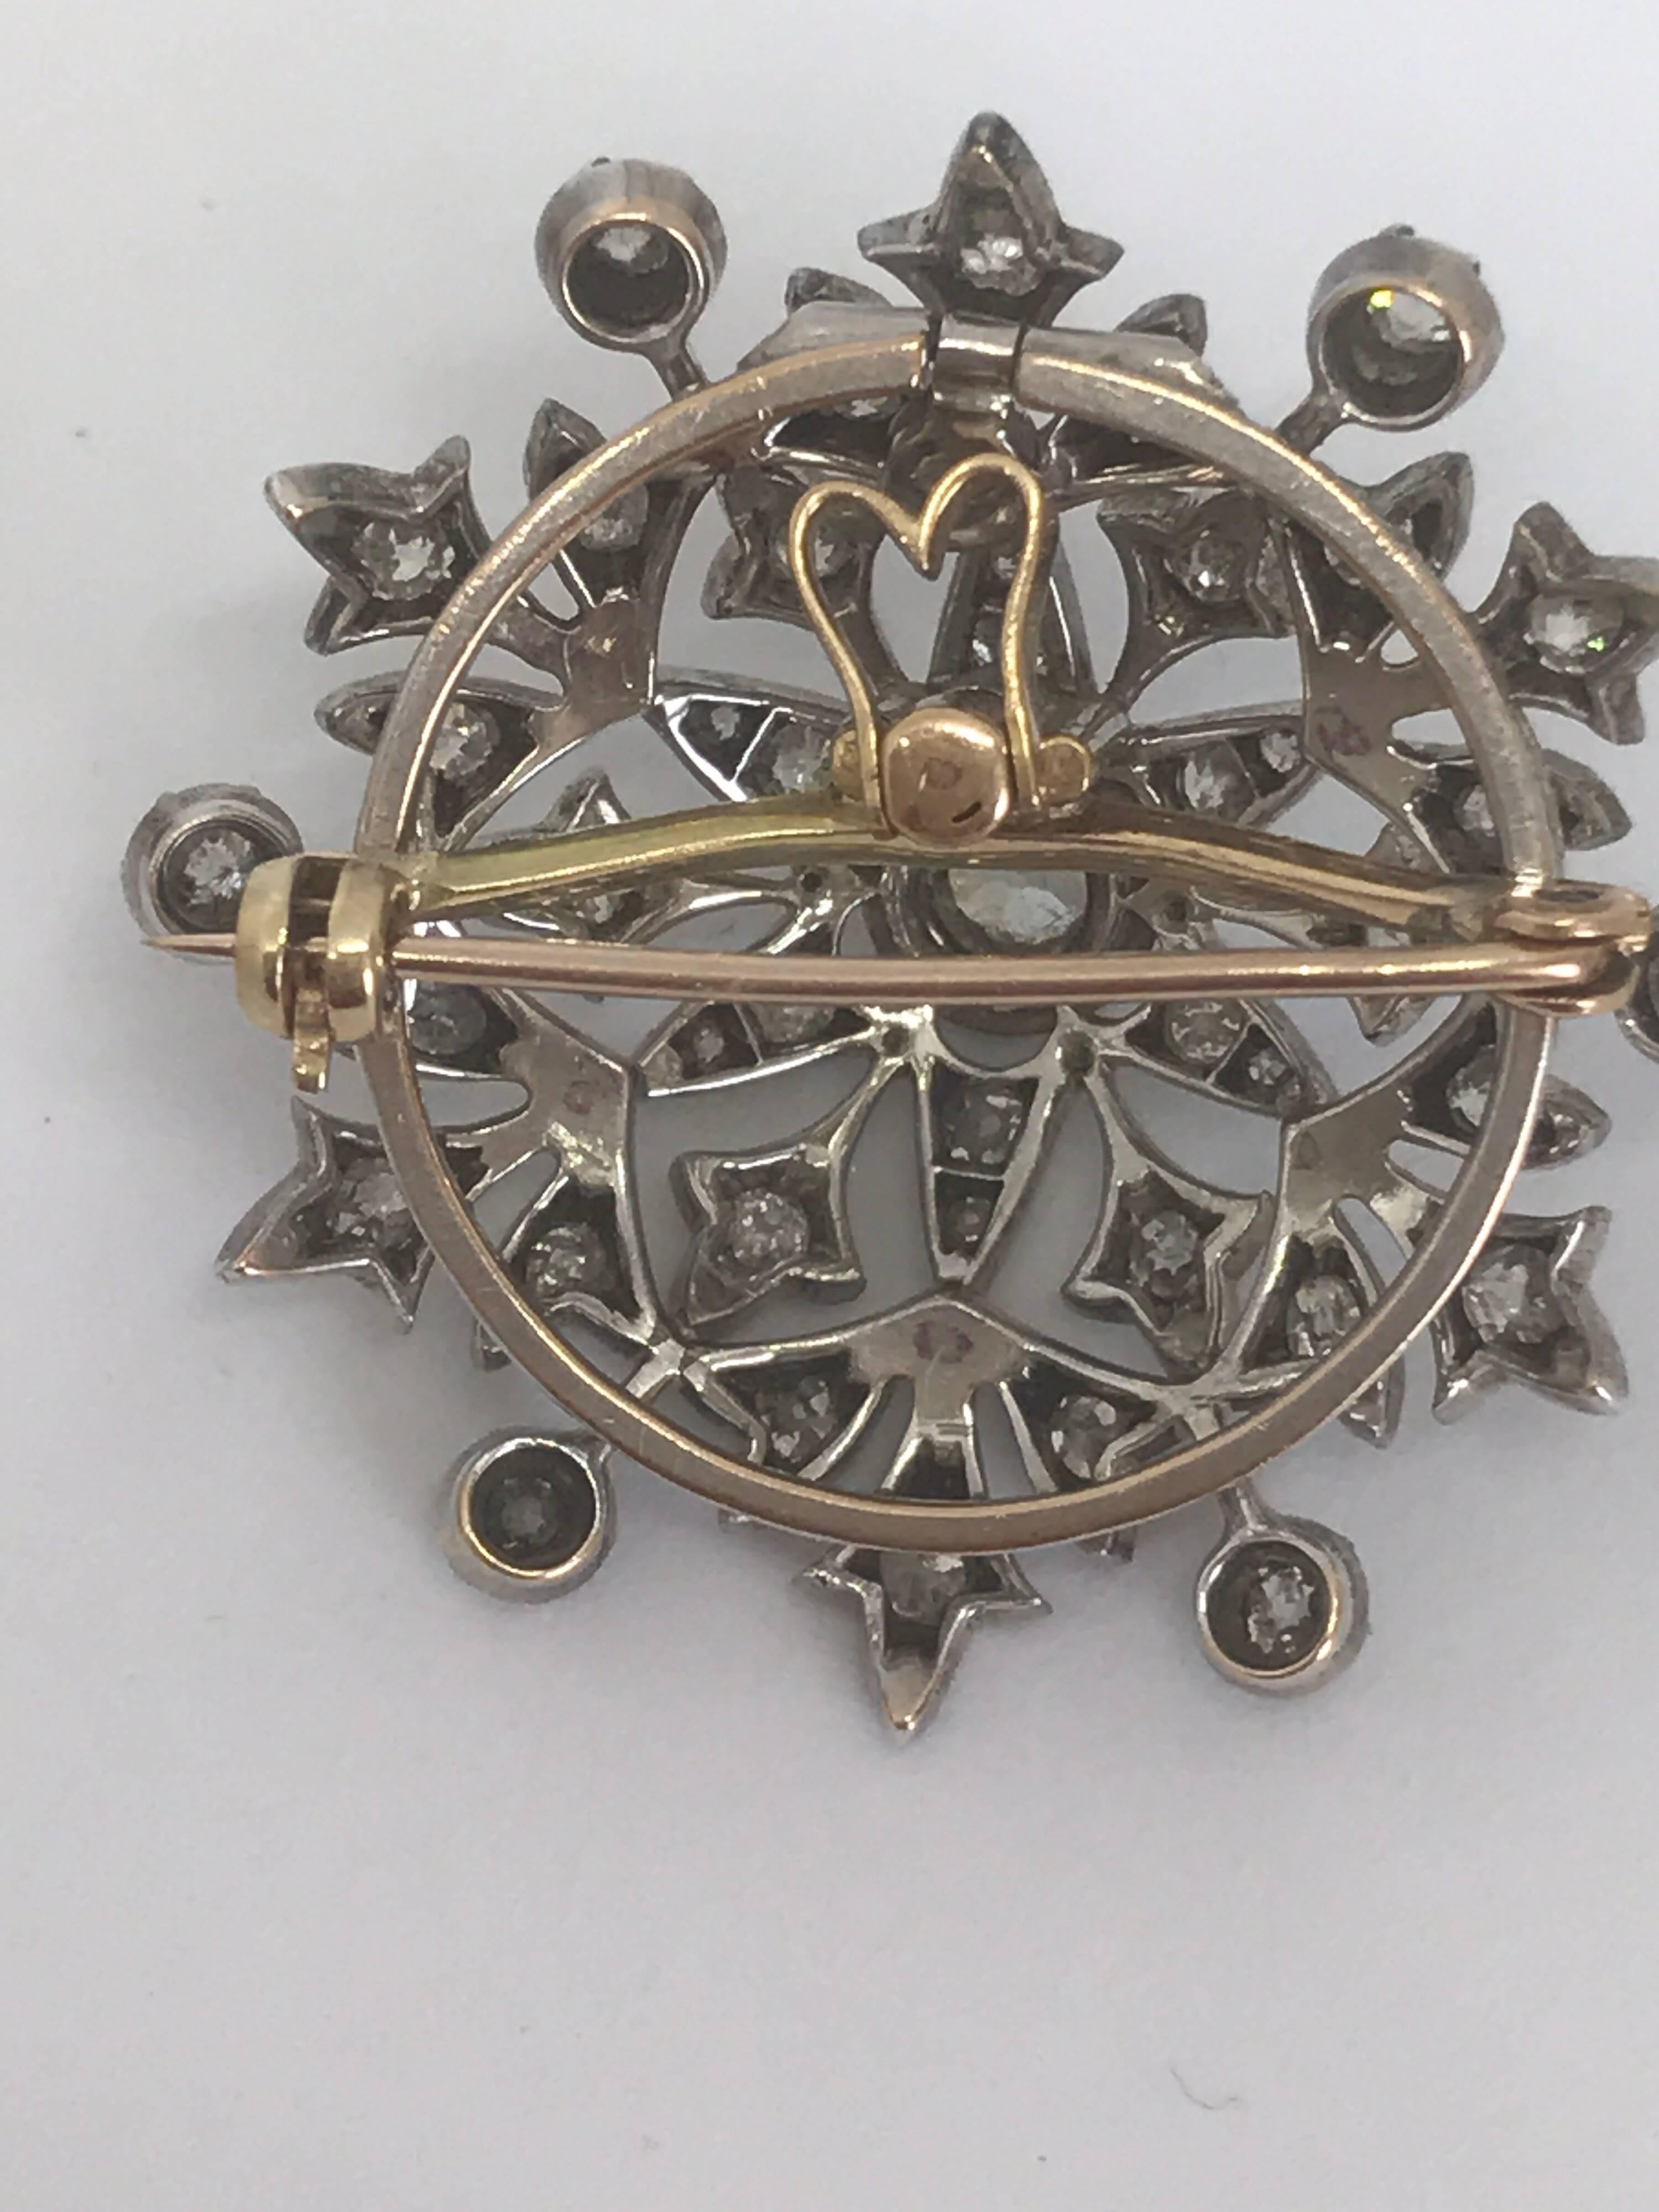 A Victorian 18k gold pendant brooch set with a central 0.6ct rose cut diamond and surrounded by smaller rose cut  diamonds totalling about 2.5-3cts. The brooch has a screw back so it can be removed when wearing it as a pendant and the pendant loupe